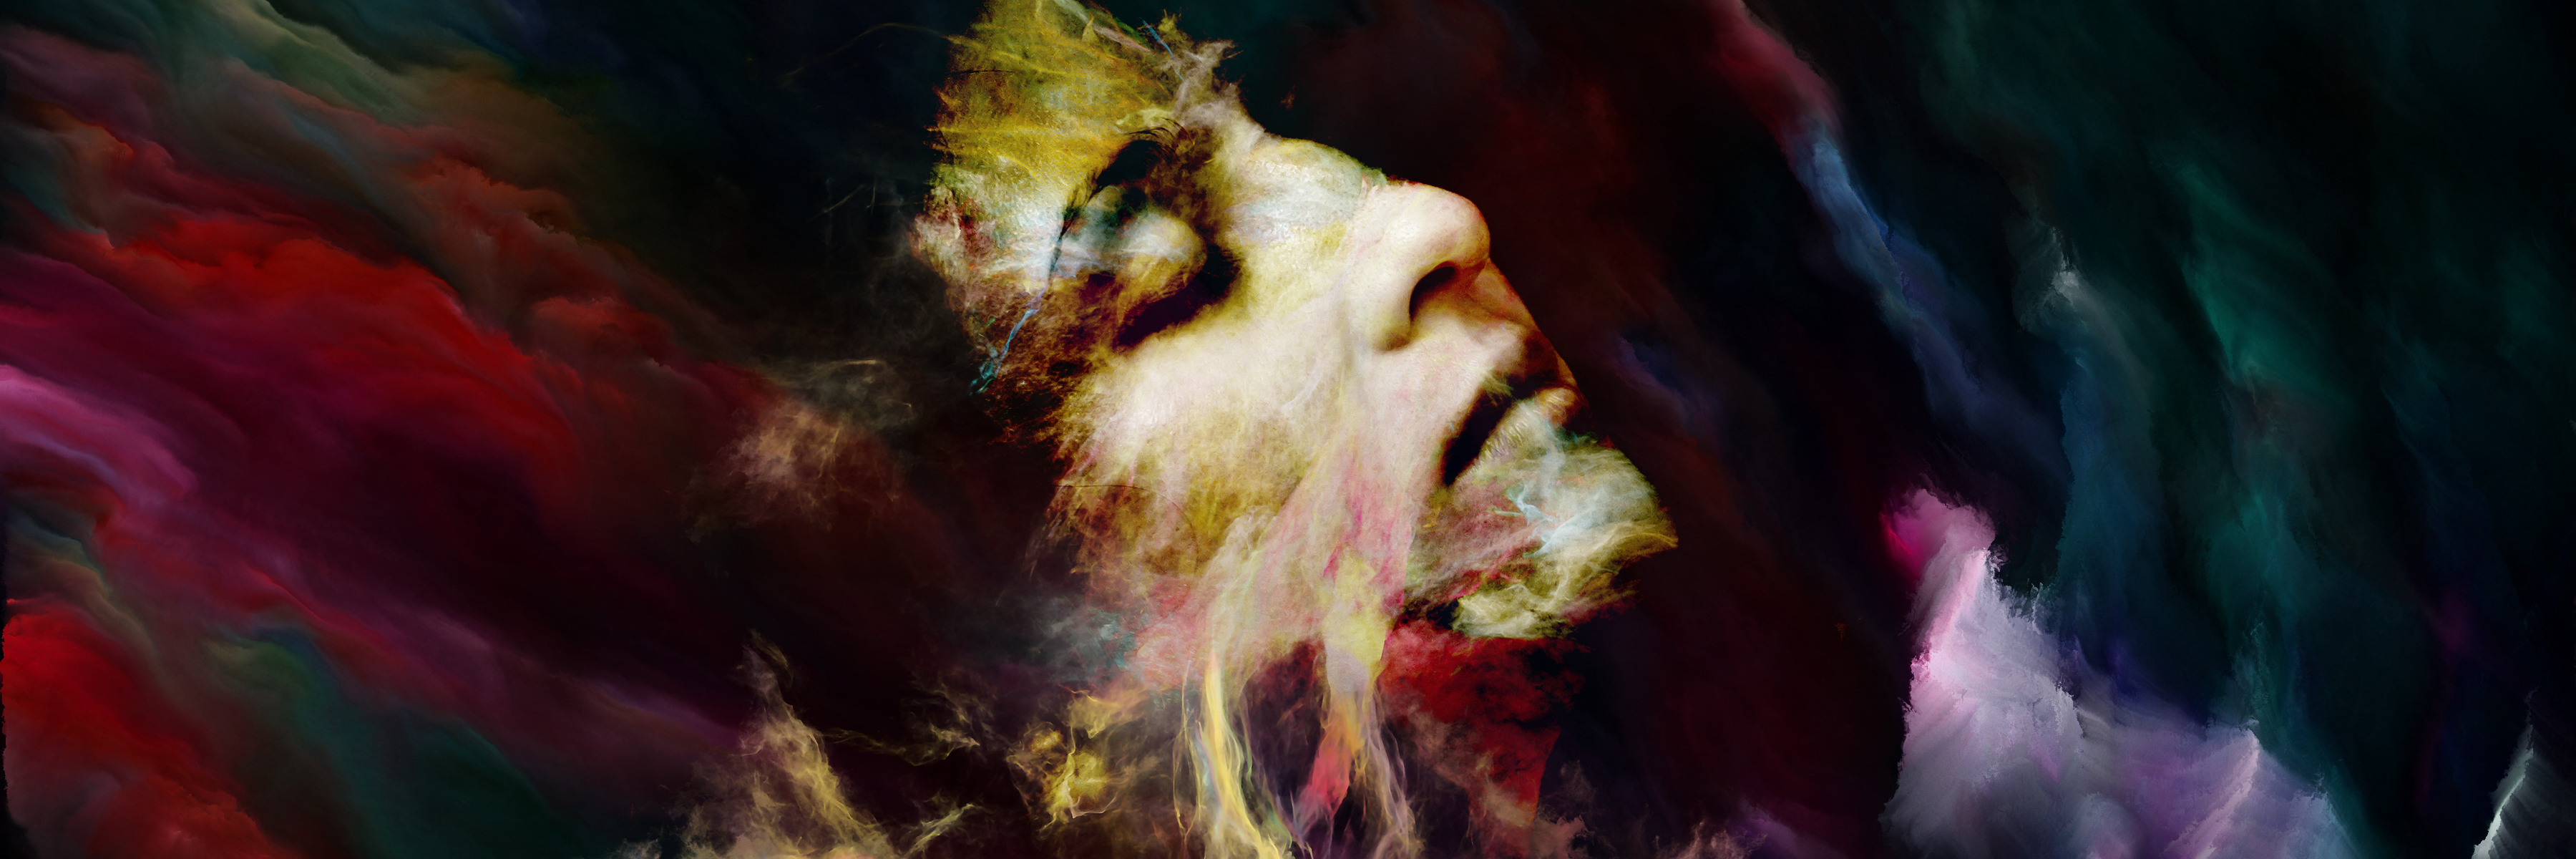 surreal colorful portrait of woman with colored swirls around her